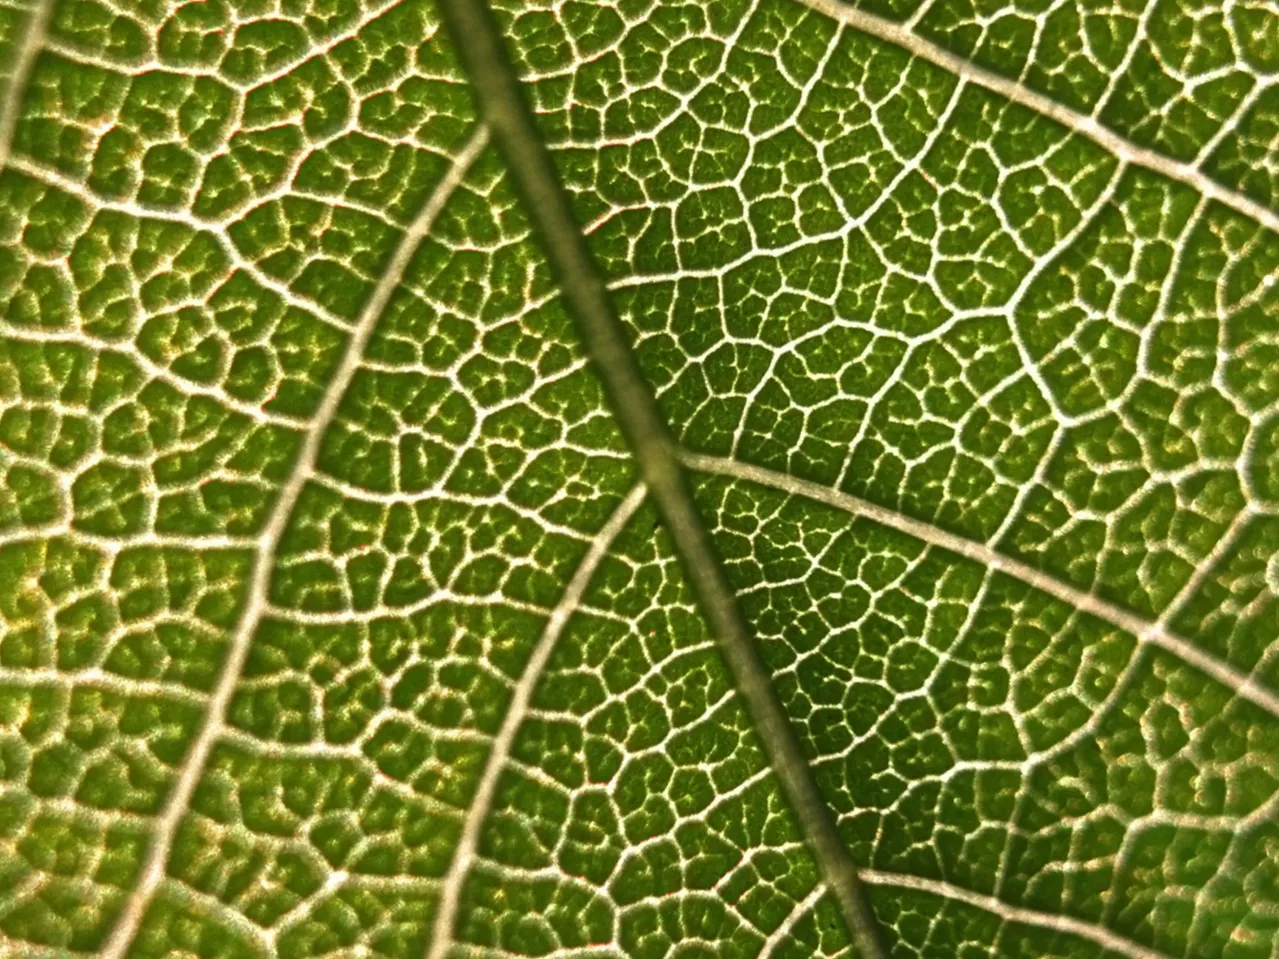 A close-up image of a green leaf showing its intricate network of veins. The veins create a web-like pattern, with various shades of green highlighting their structure. The texture of the leaf surface is detailed and prominently visible.